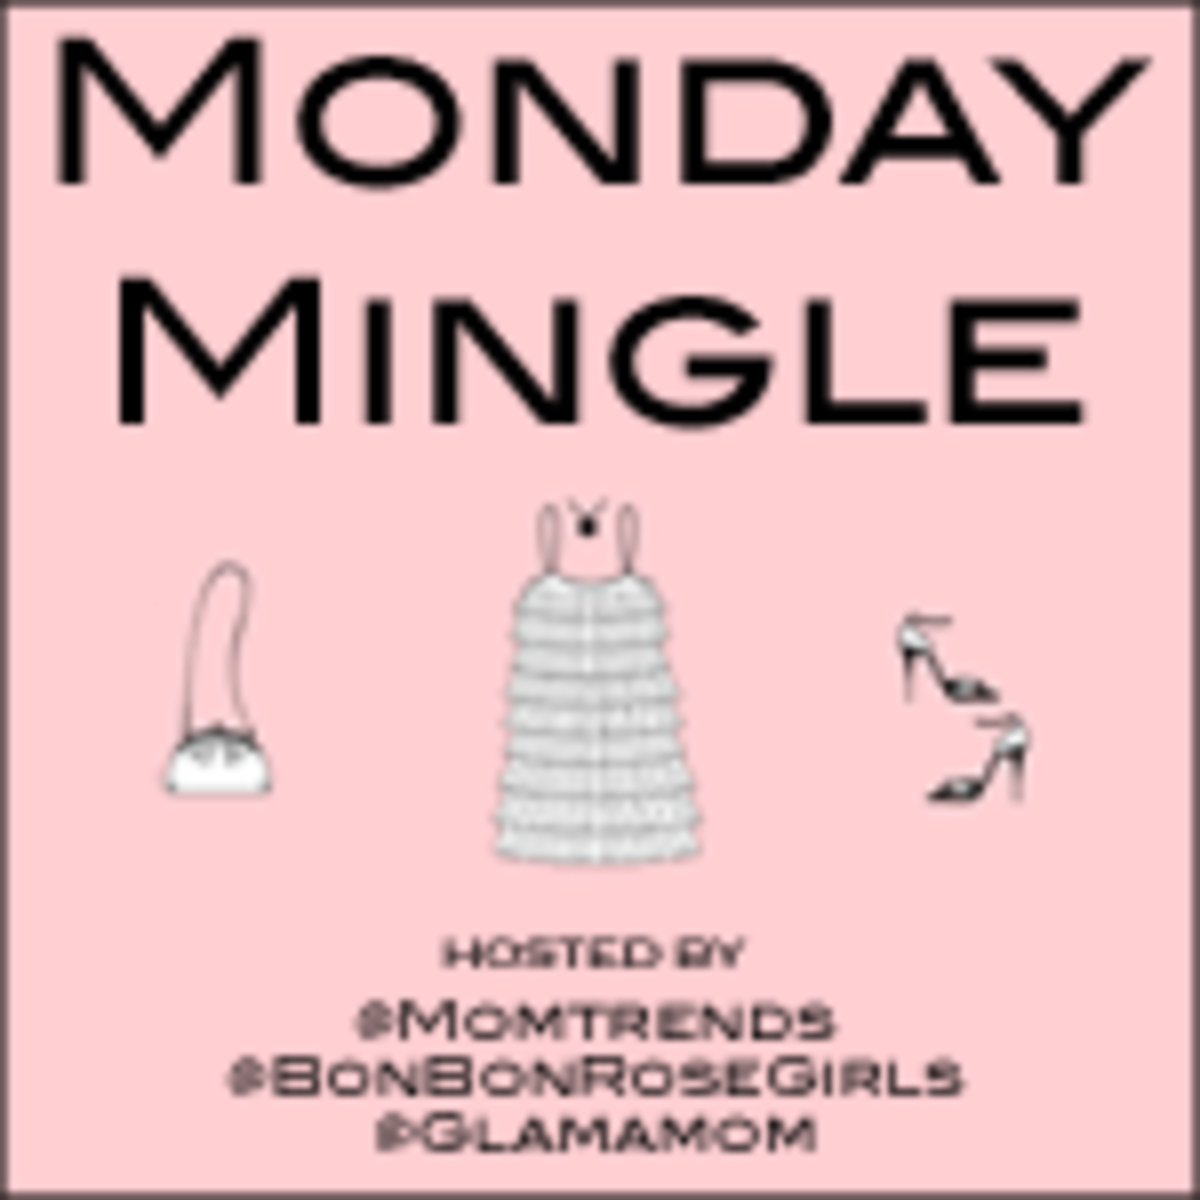 http://www.momtrends.com/wp-content/uploads/2011/07/Monday-Mingle-Button150.png